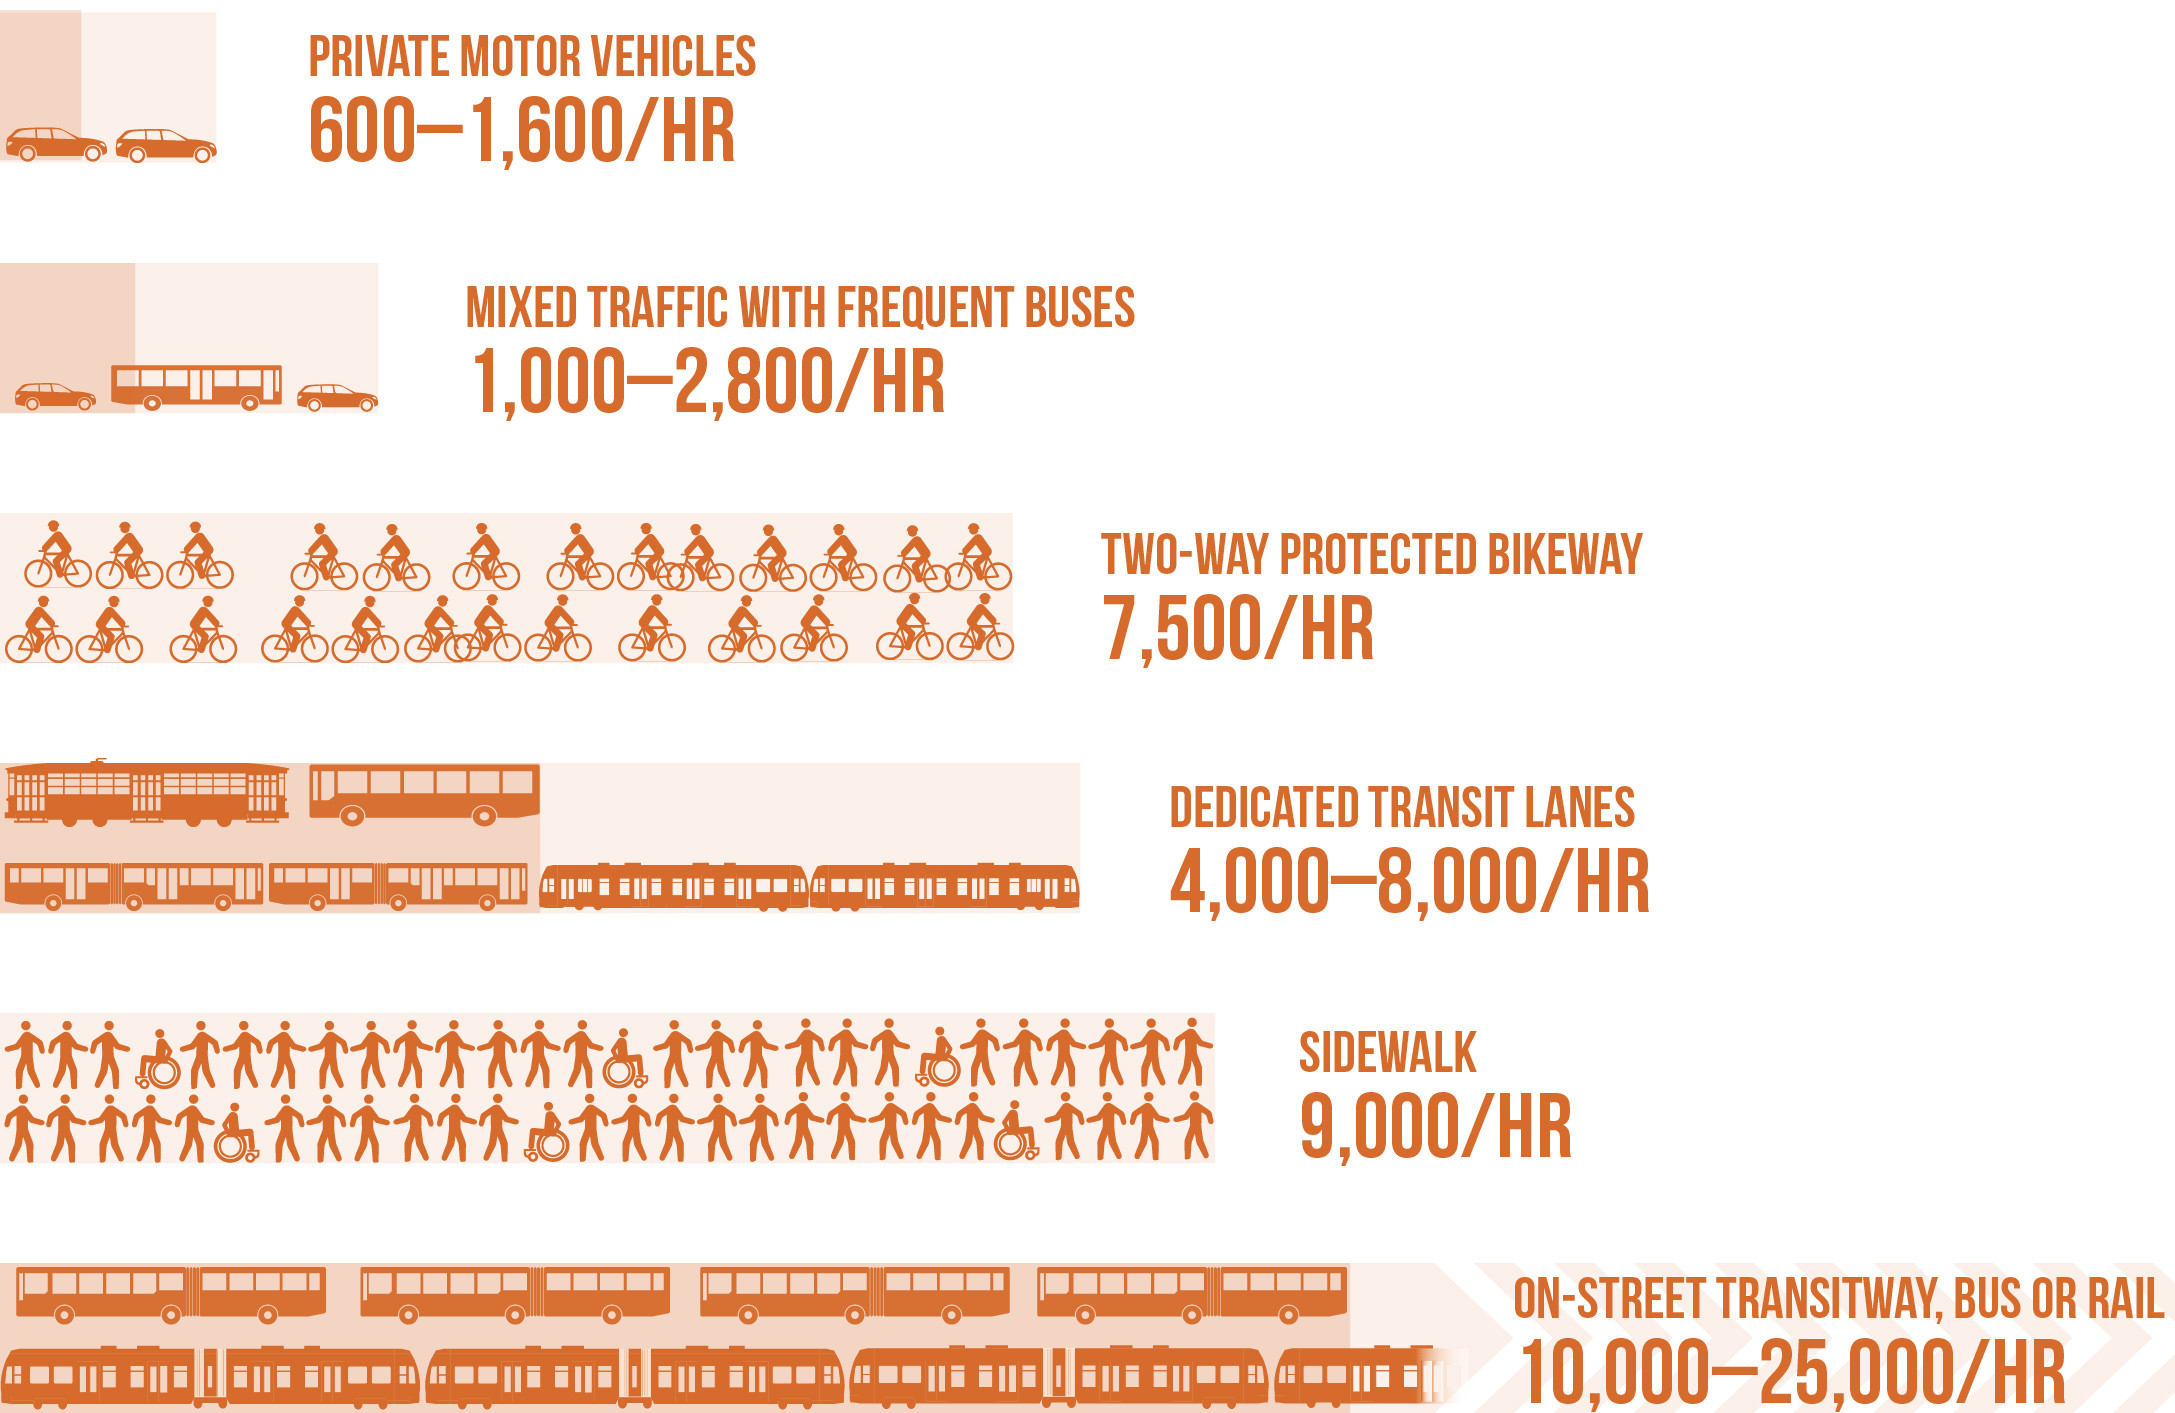 Figure 6-1 is a graphic showing the amount of people per hour Throughput Capacity for Private Motor Vehicles, Mixed Traffic with Frequent Buses, Two-Way Protected Bikeway, Dedicated Transit Lanes, Sidewalk, and On-Street Transitway, Bus or Rail. 